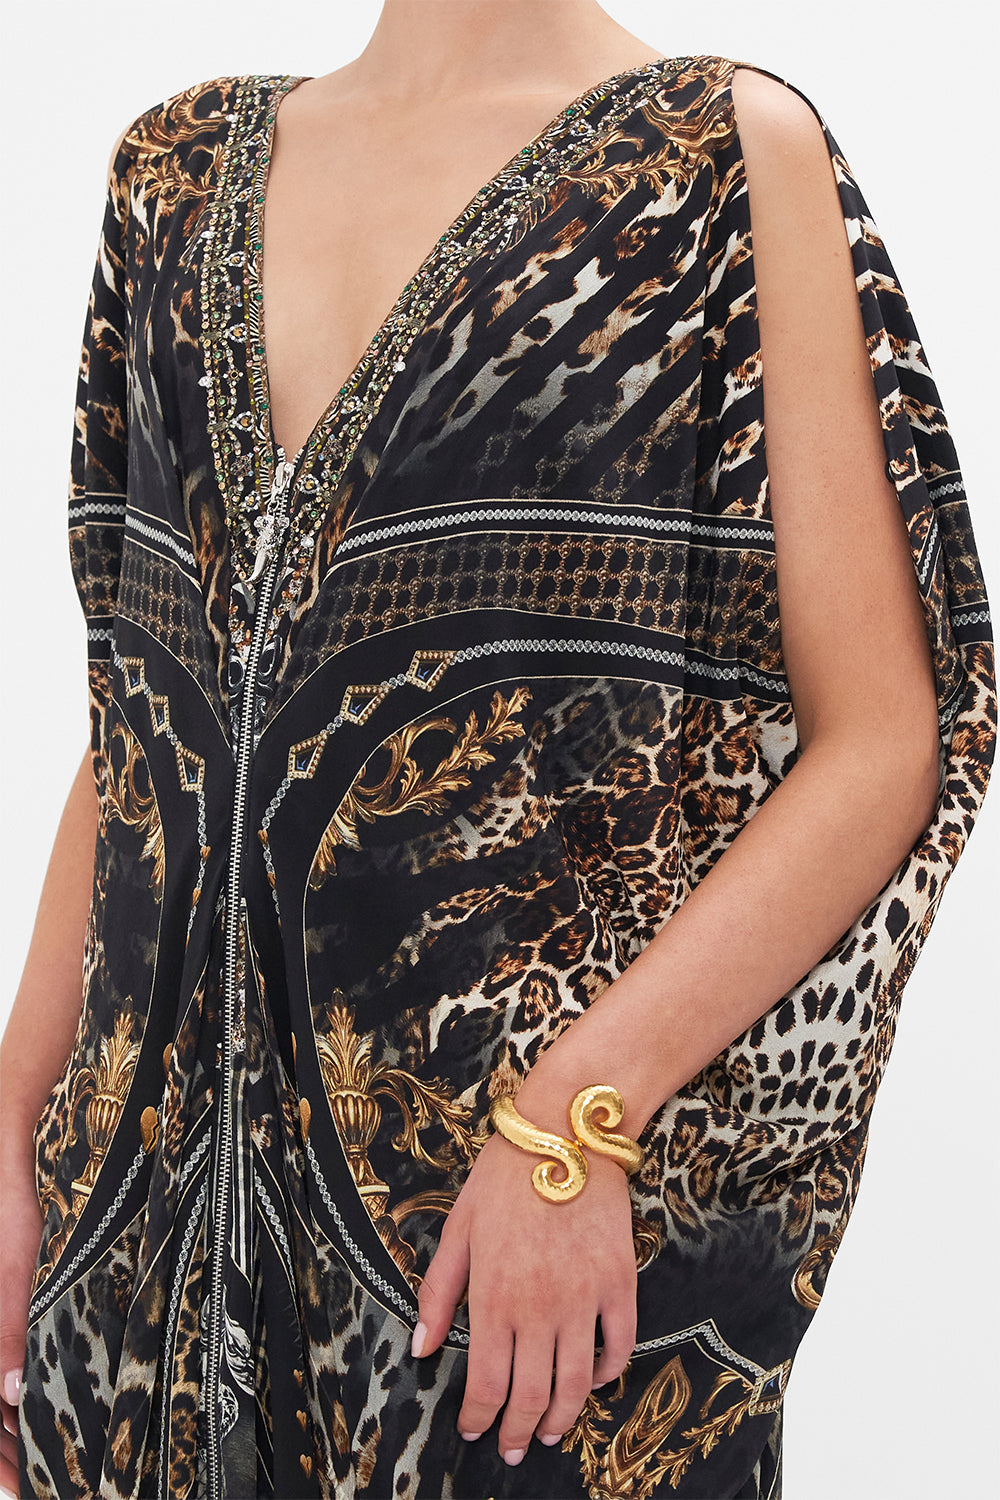 Angled detail view of model wearing CAMILLA silk maxi dress Chaos In The Cosmos animal print